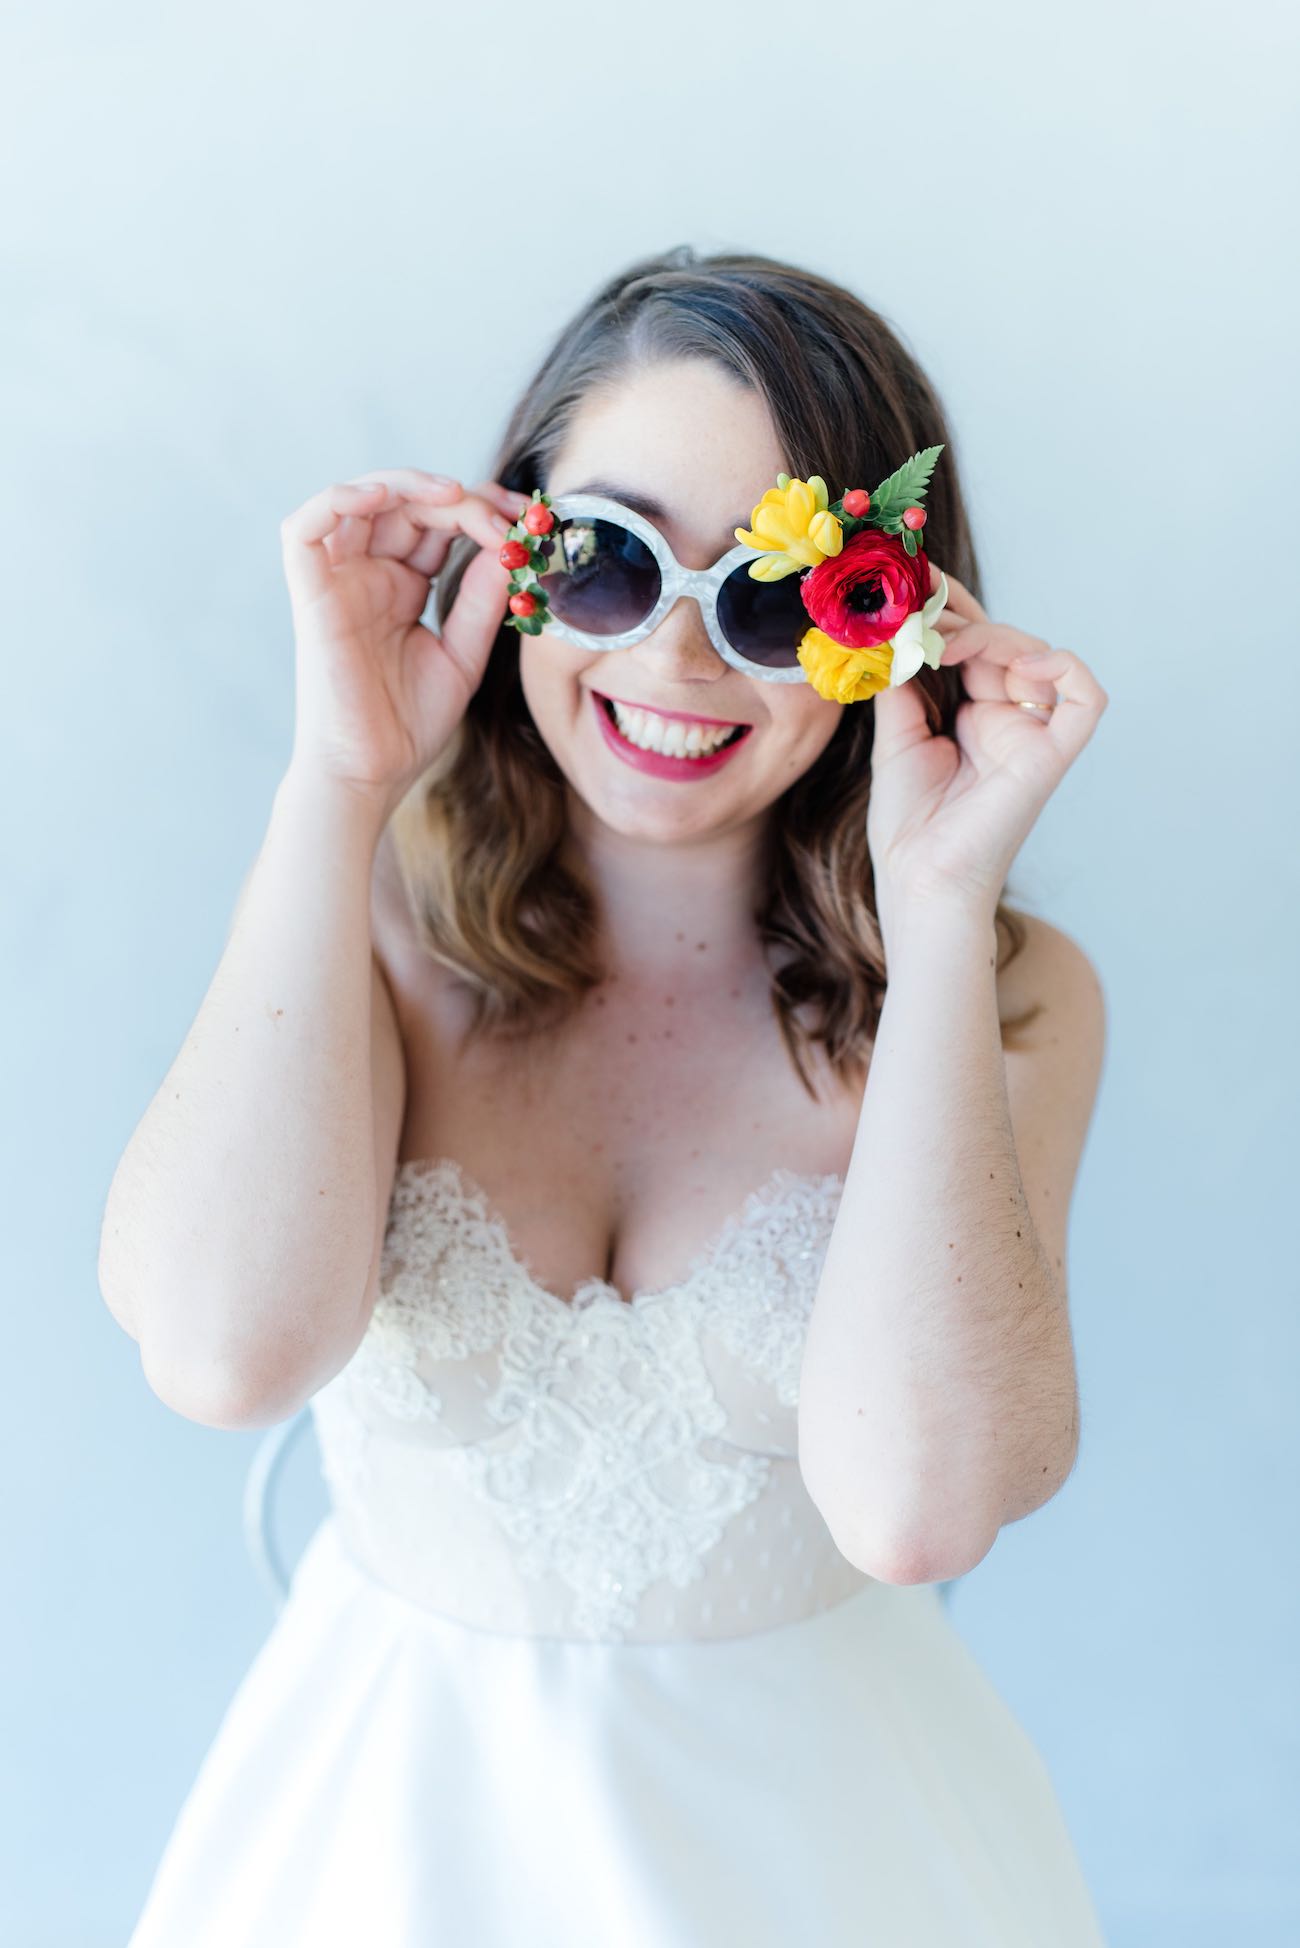 Fun tropical flower beach bridesmaid sunglasses idea. Click for the most absolutely gorgeous Tropical Wedding ideas ever!